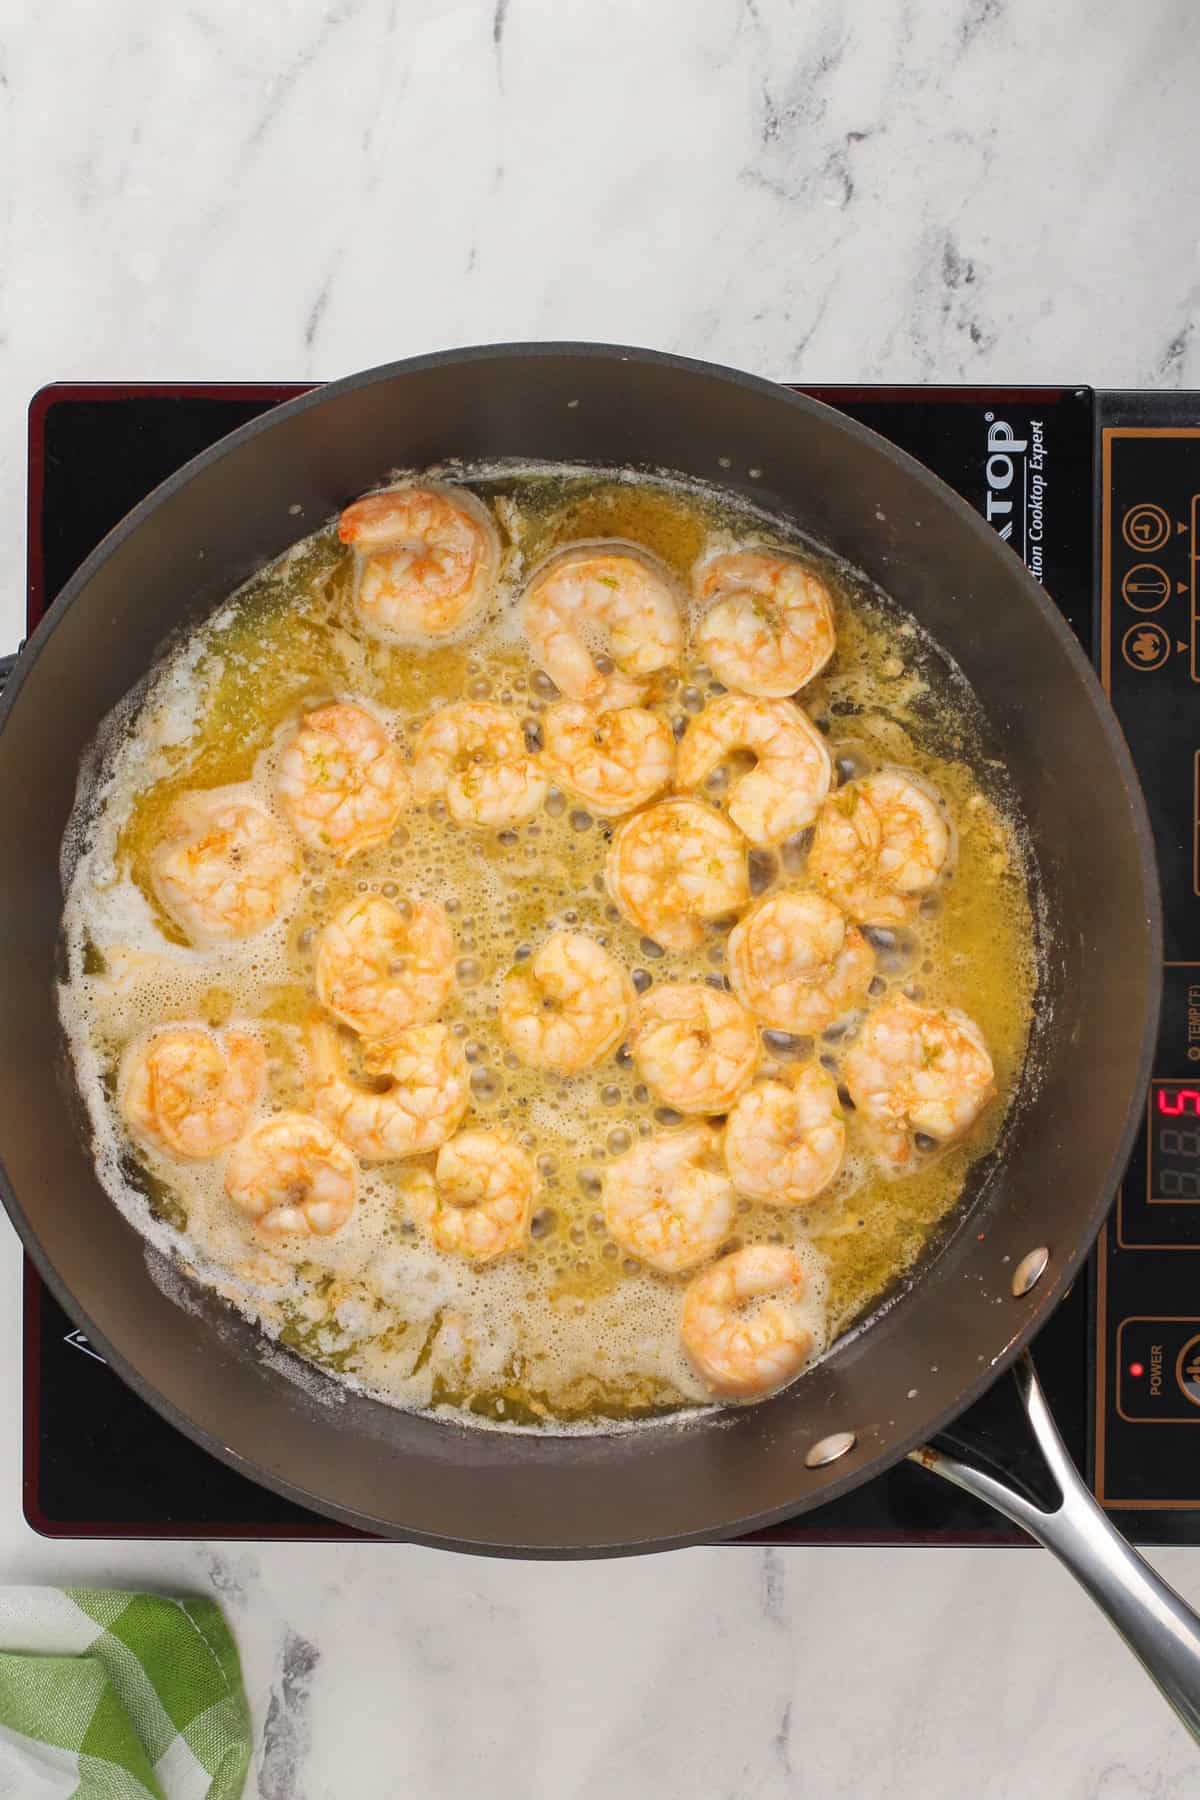 Shrimp being cooked in butter in a pan.